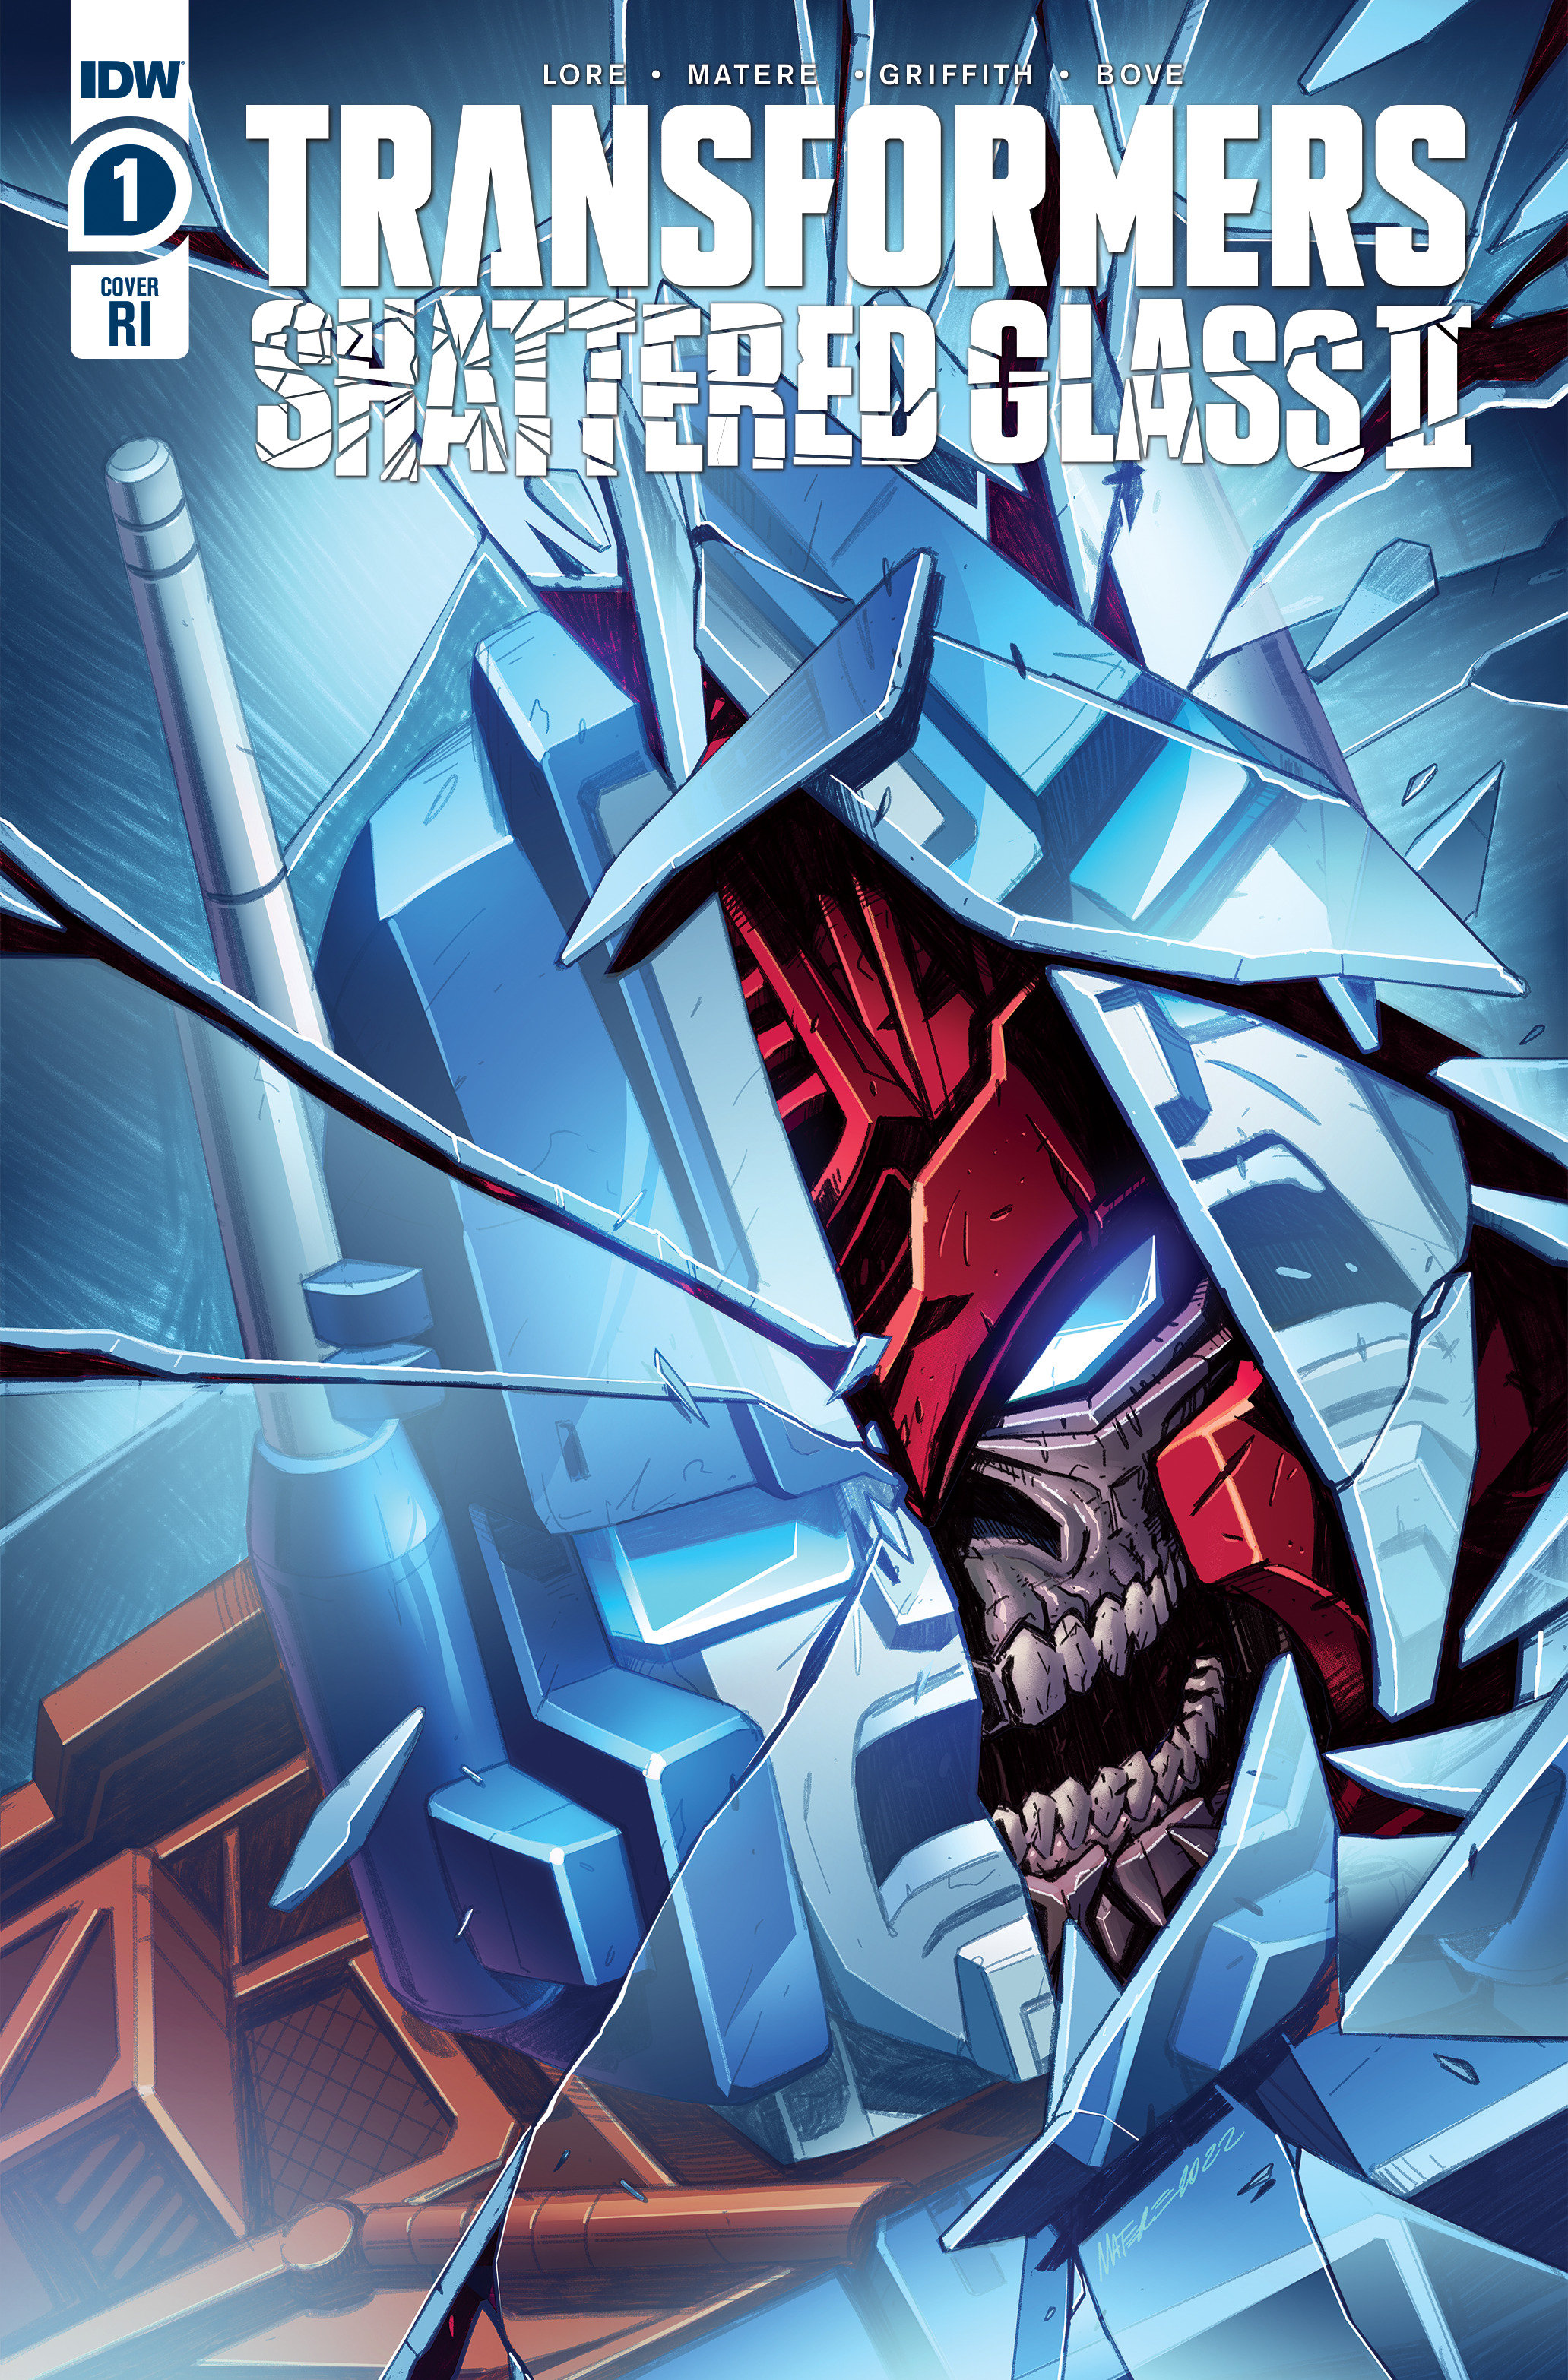 Transformers Shattered Glass II #1 Cover C 1 for 10 Incentive Matere